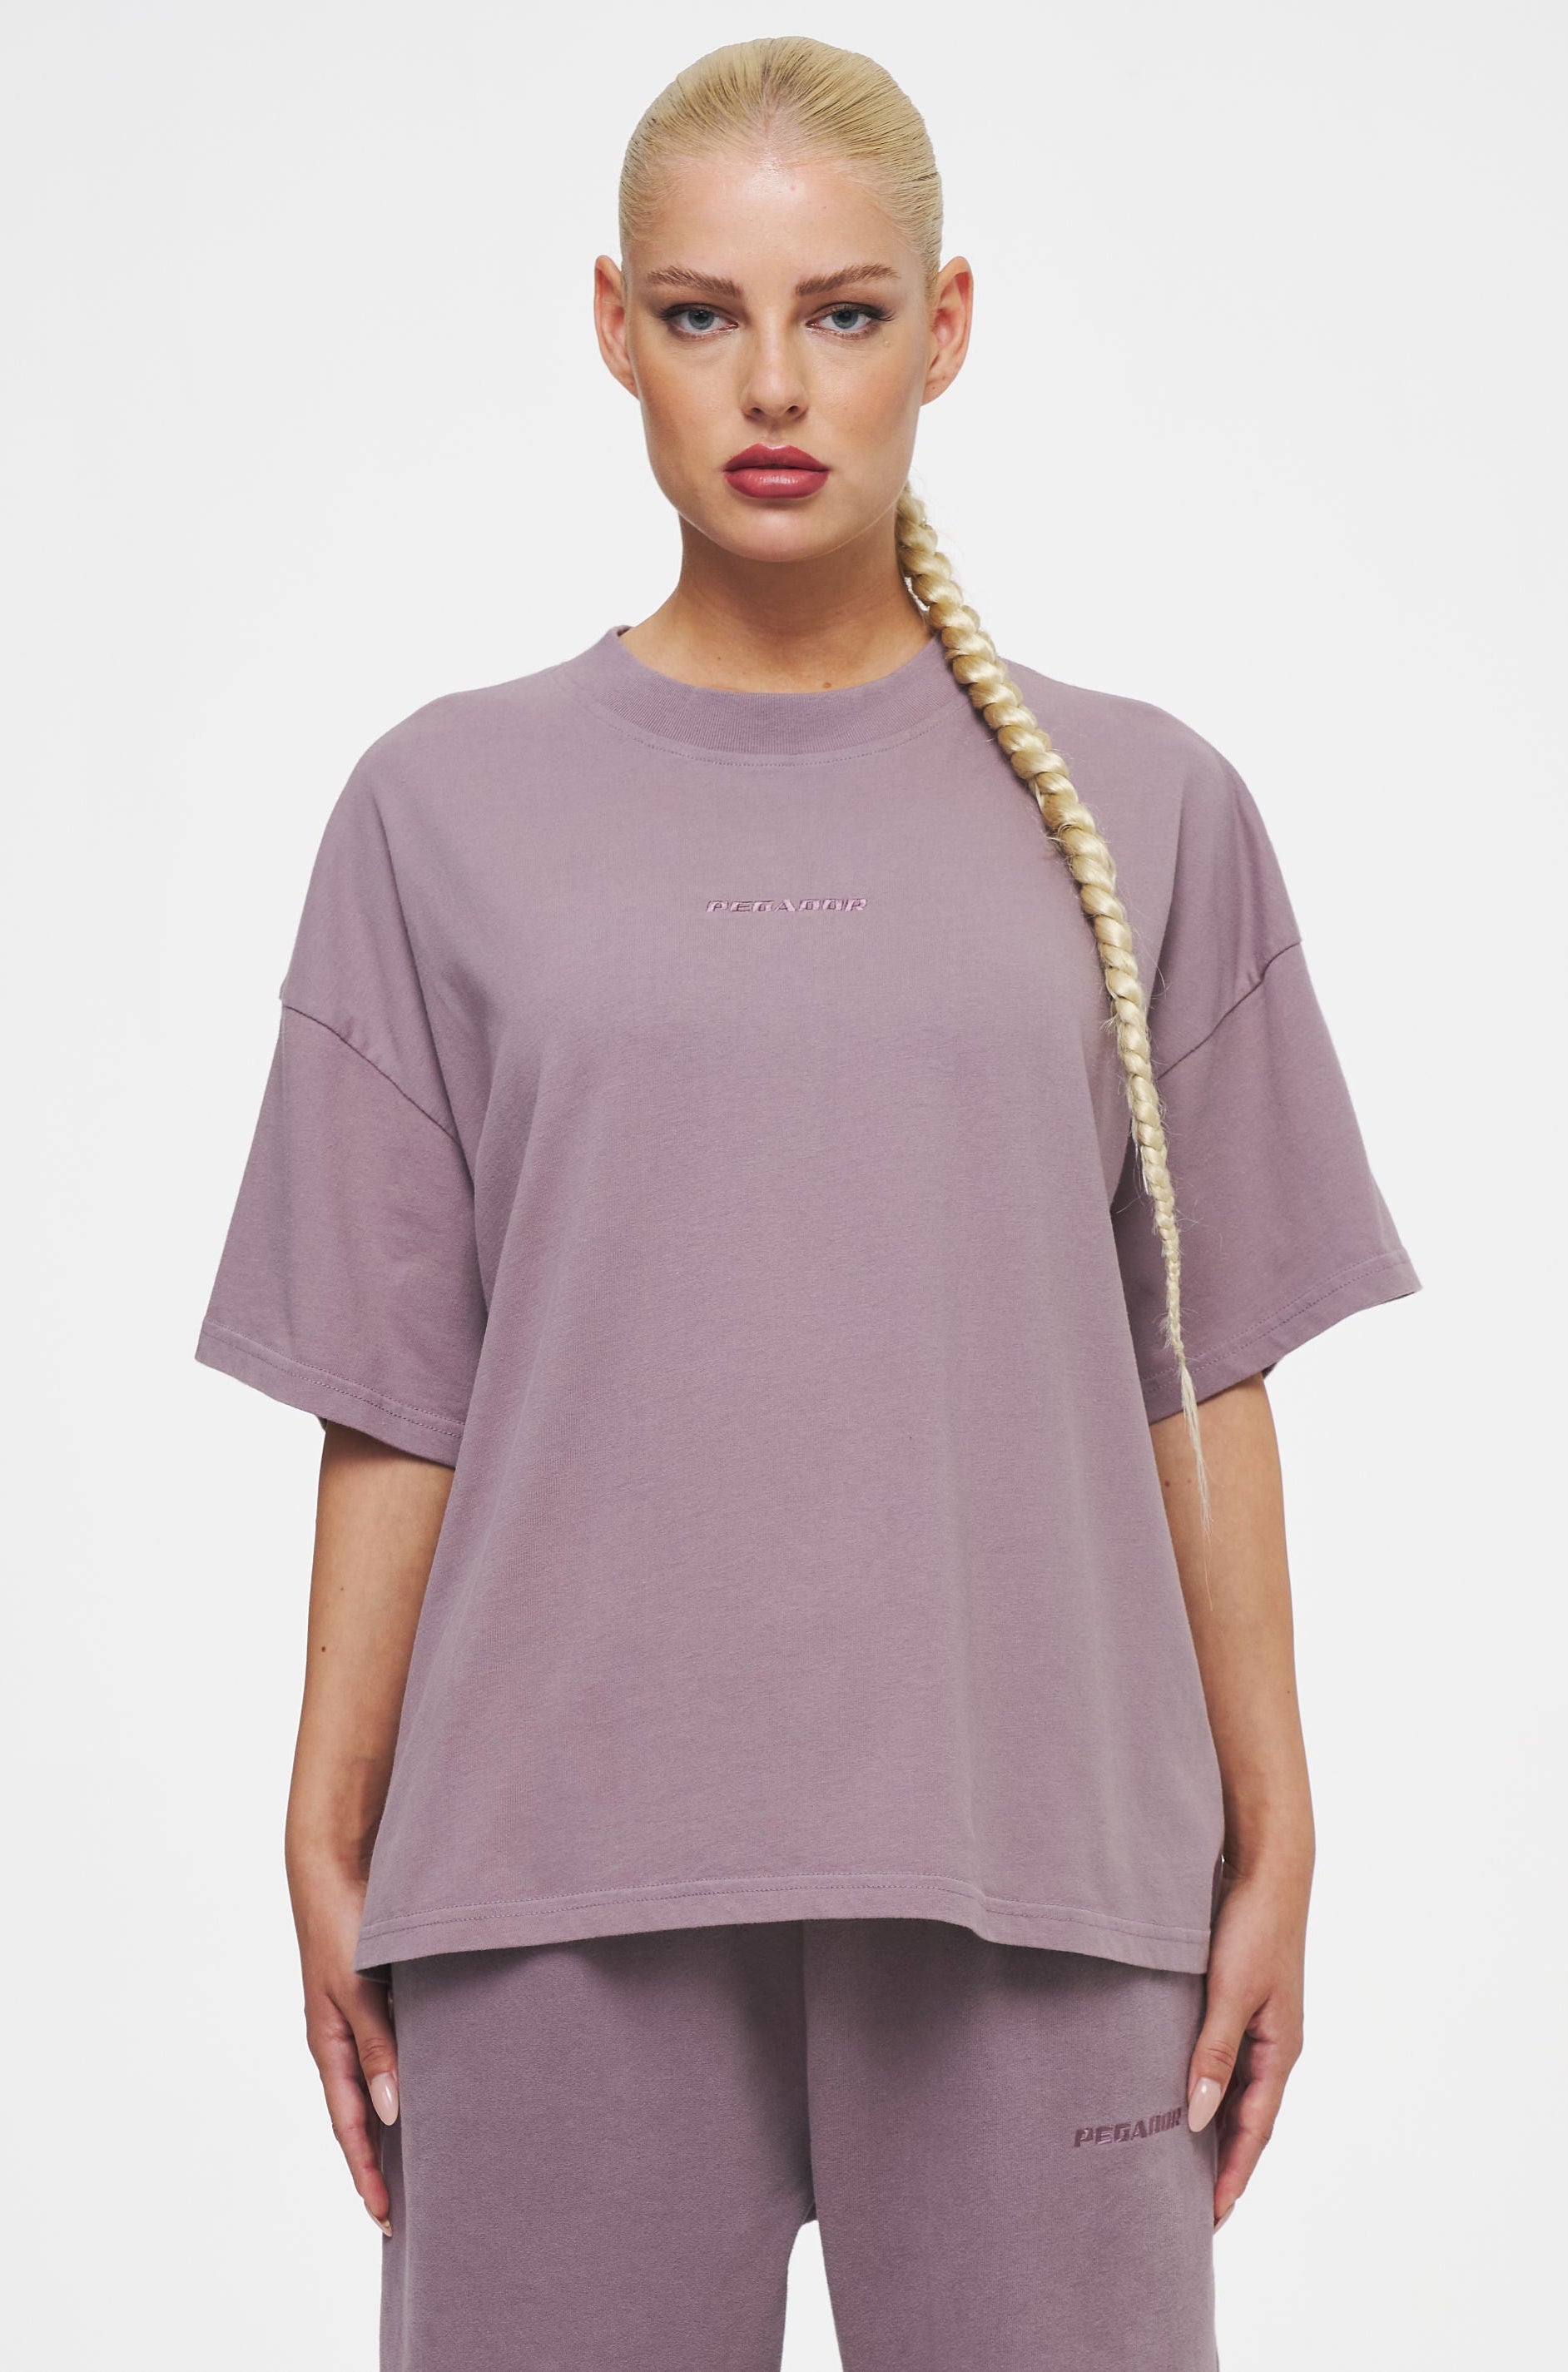 Bel Air Heavy Oversized Tee Washed Future Violet Tees | Women Ahead of Time Female 